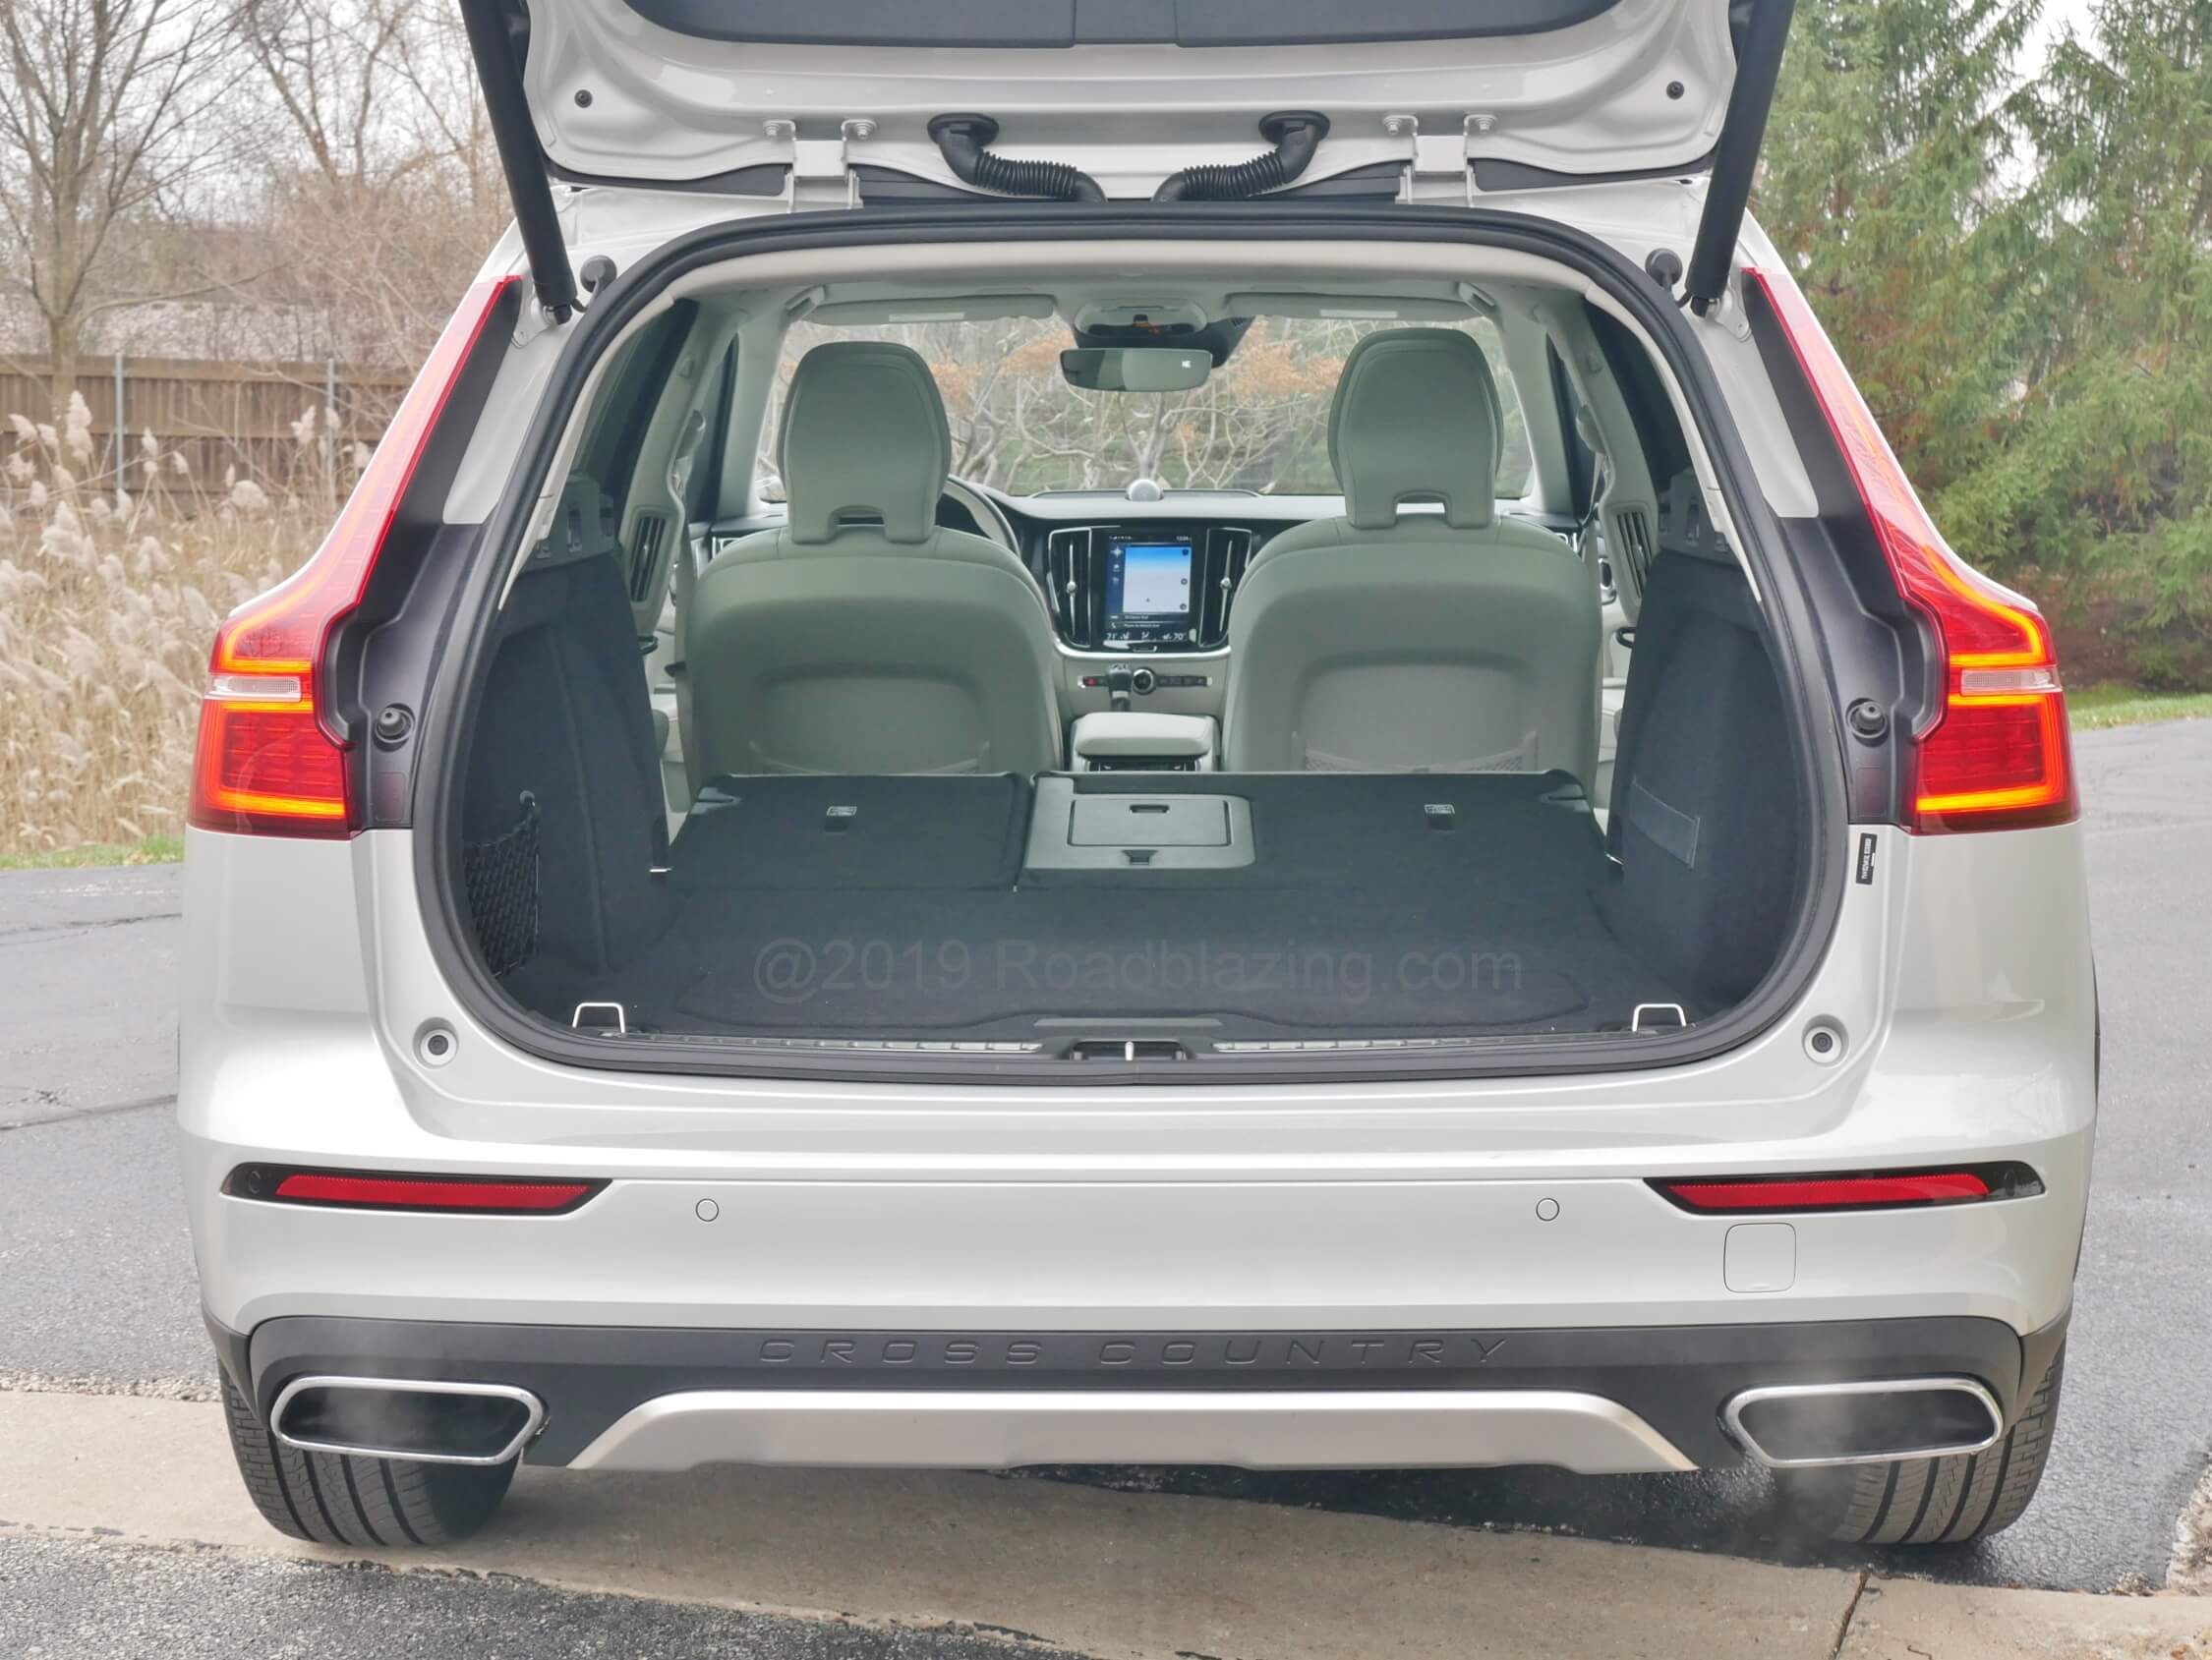 2020 Volvo V60 T5 AWD Cross Country: low load liftover leads to wide cargo aperture expanded by 60/40 split folding 2nd Row seatbacks and center pass through